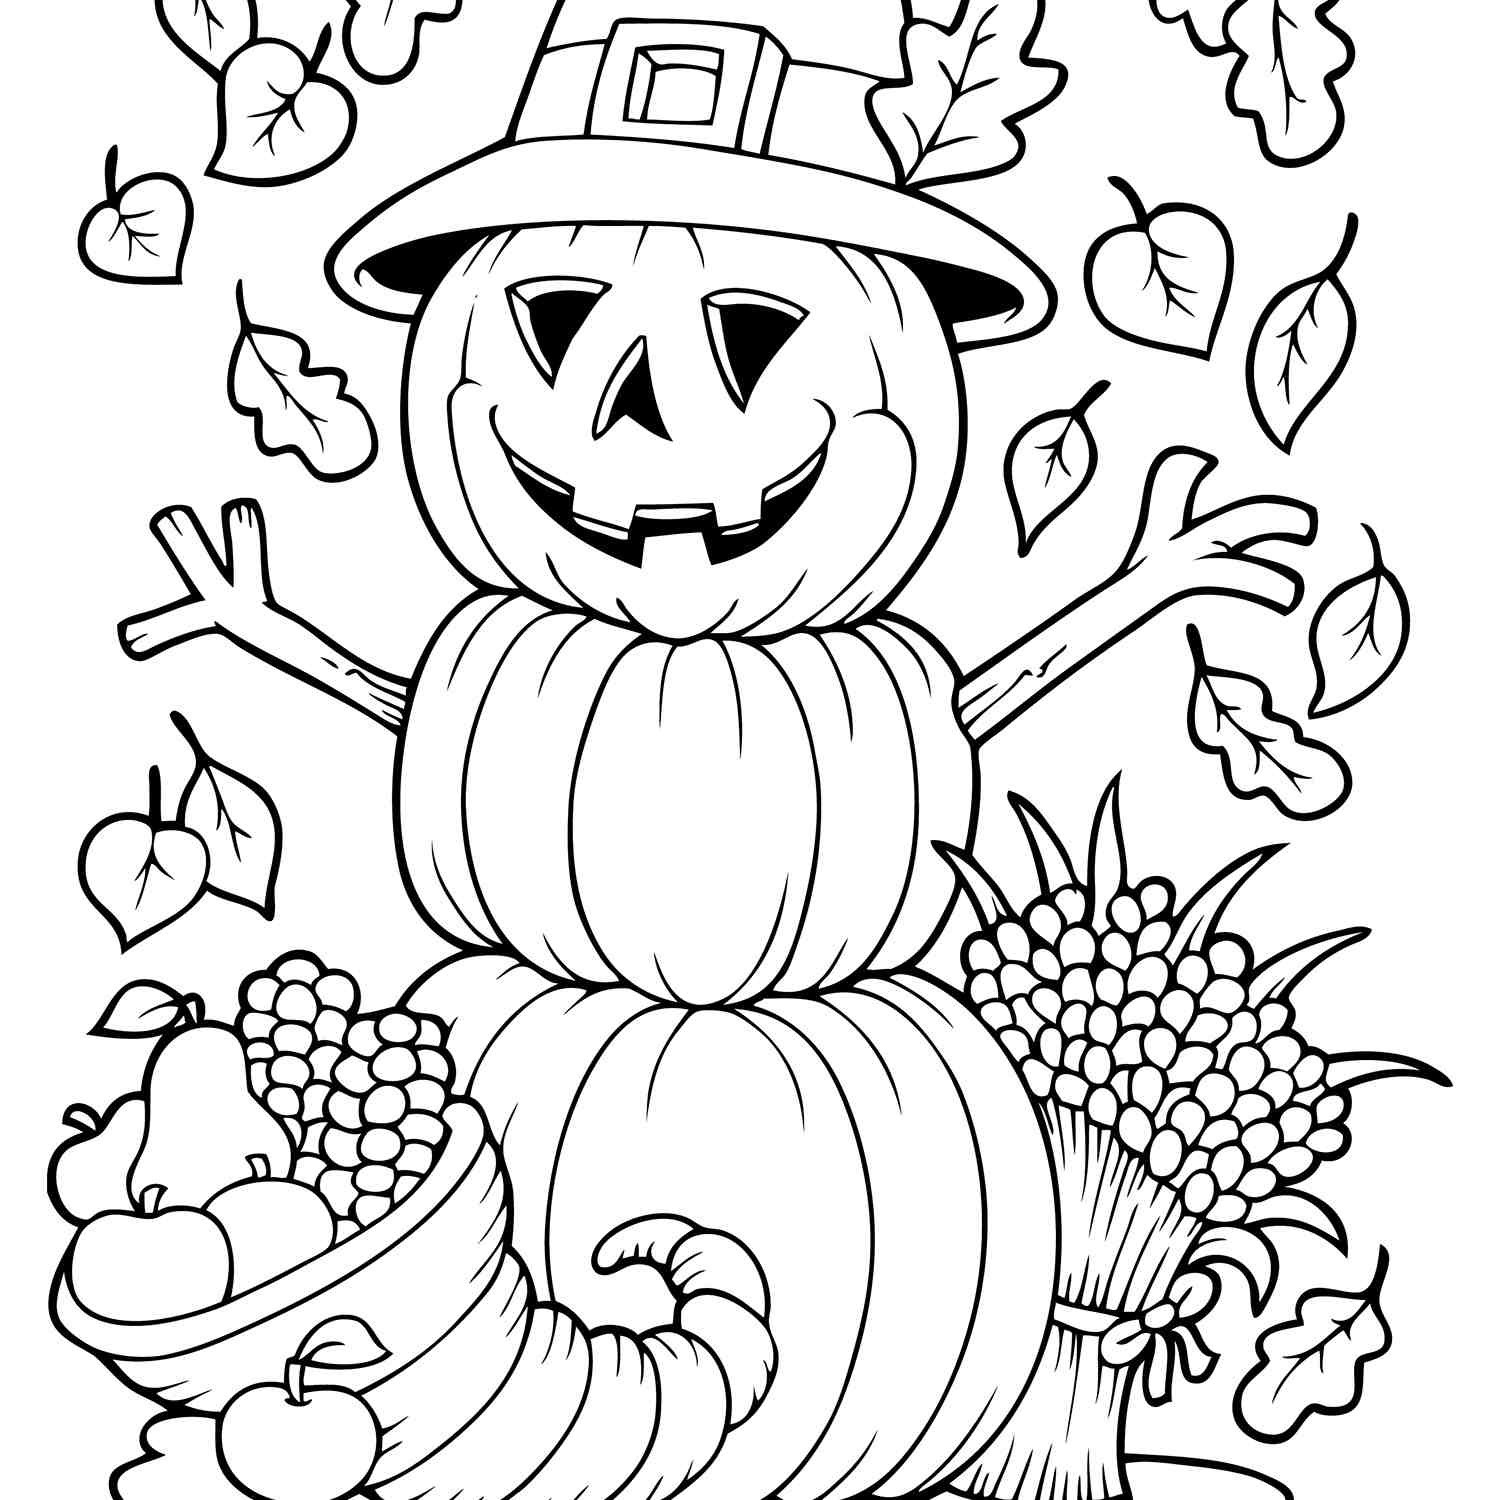 Free Printable Autumn Coloring Pages
 Free Autumn and Fall Coloring Pages